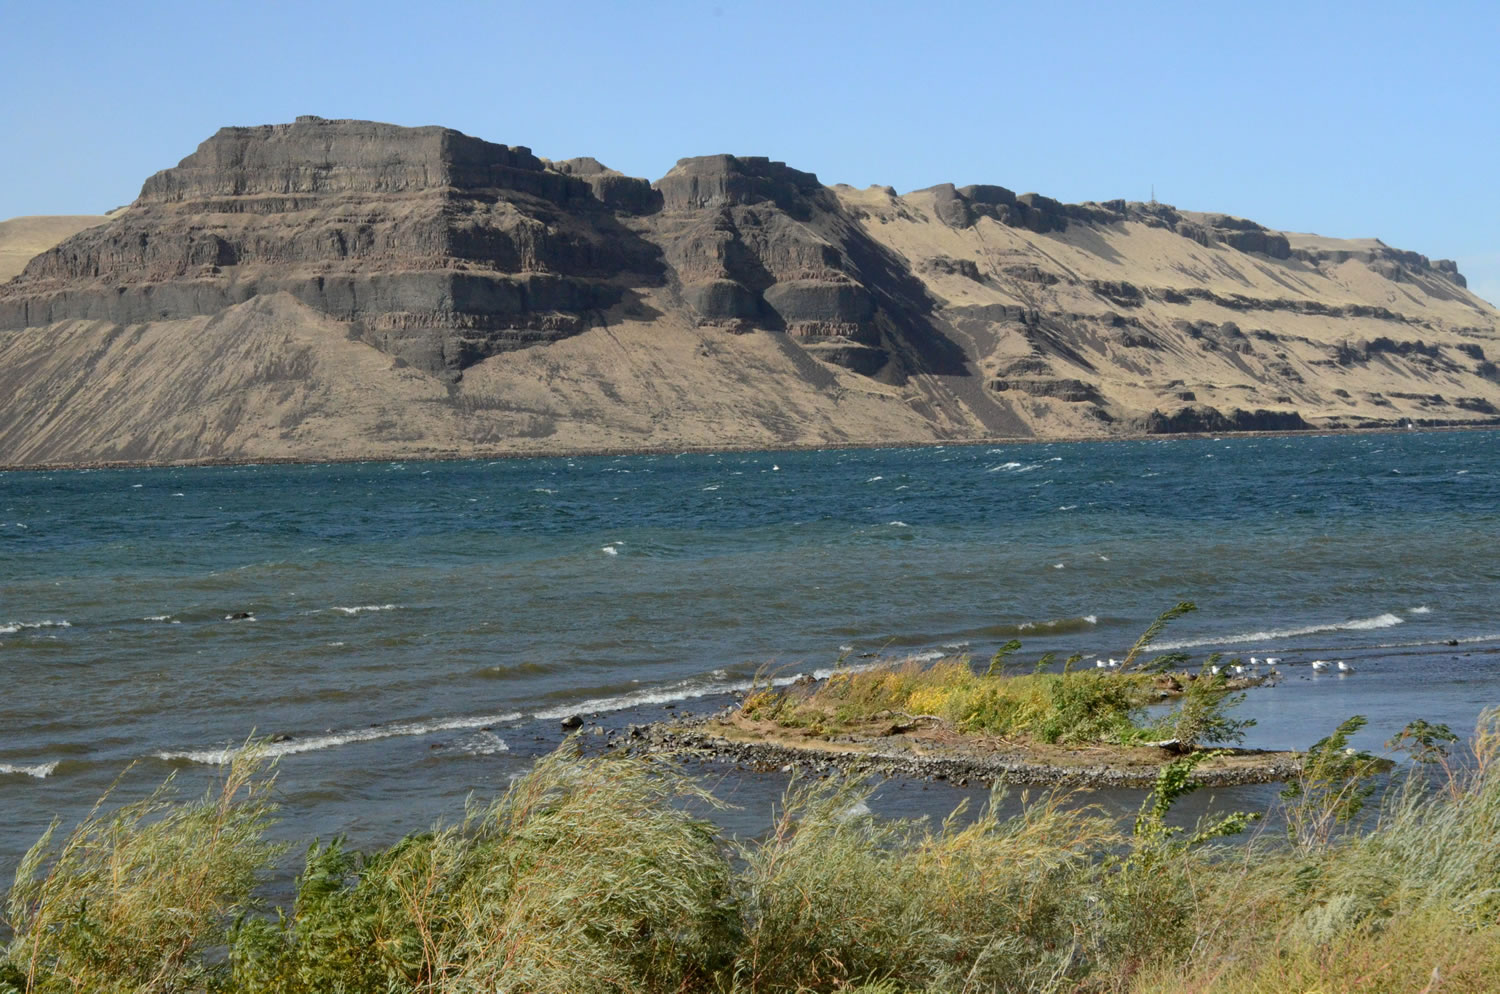 A National Natural Landmark, Wallula Gap, sits downstream on the Columbia River from Kennewick.